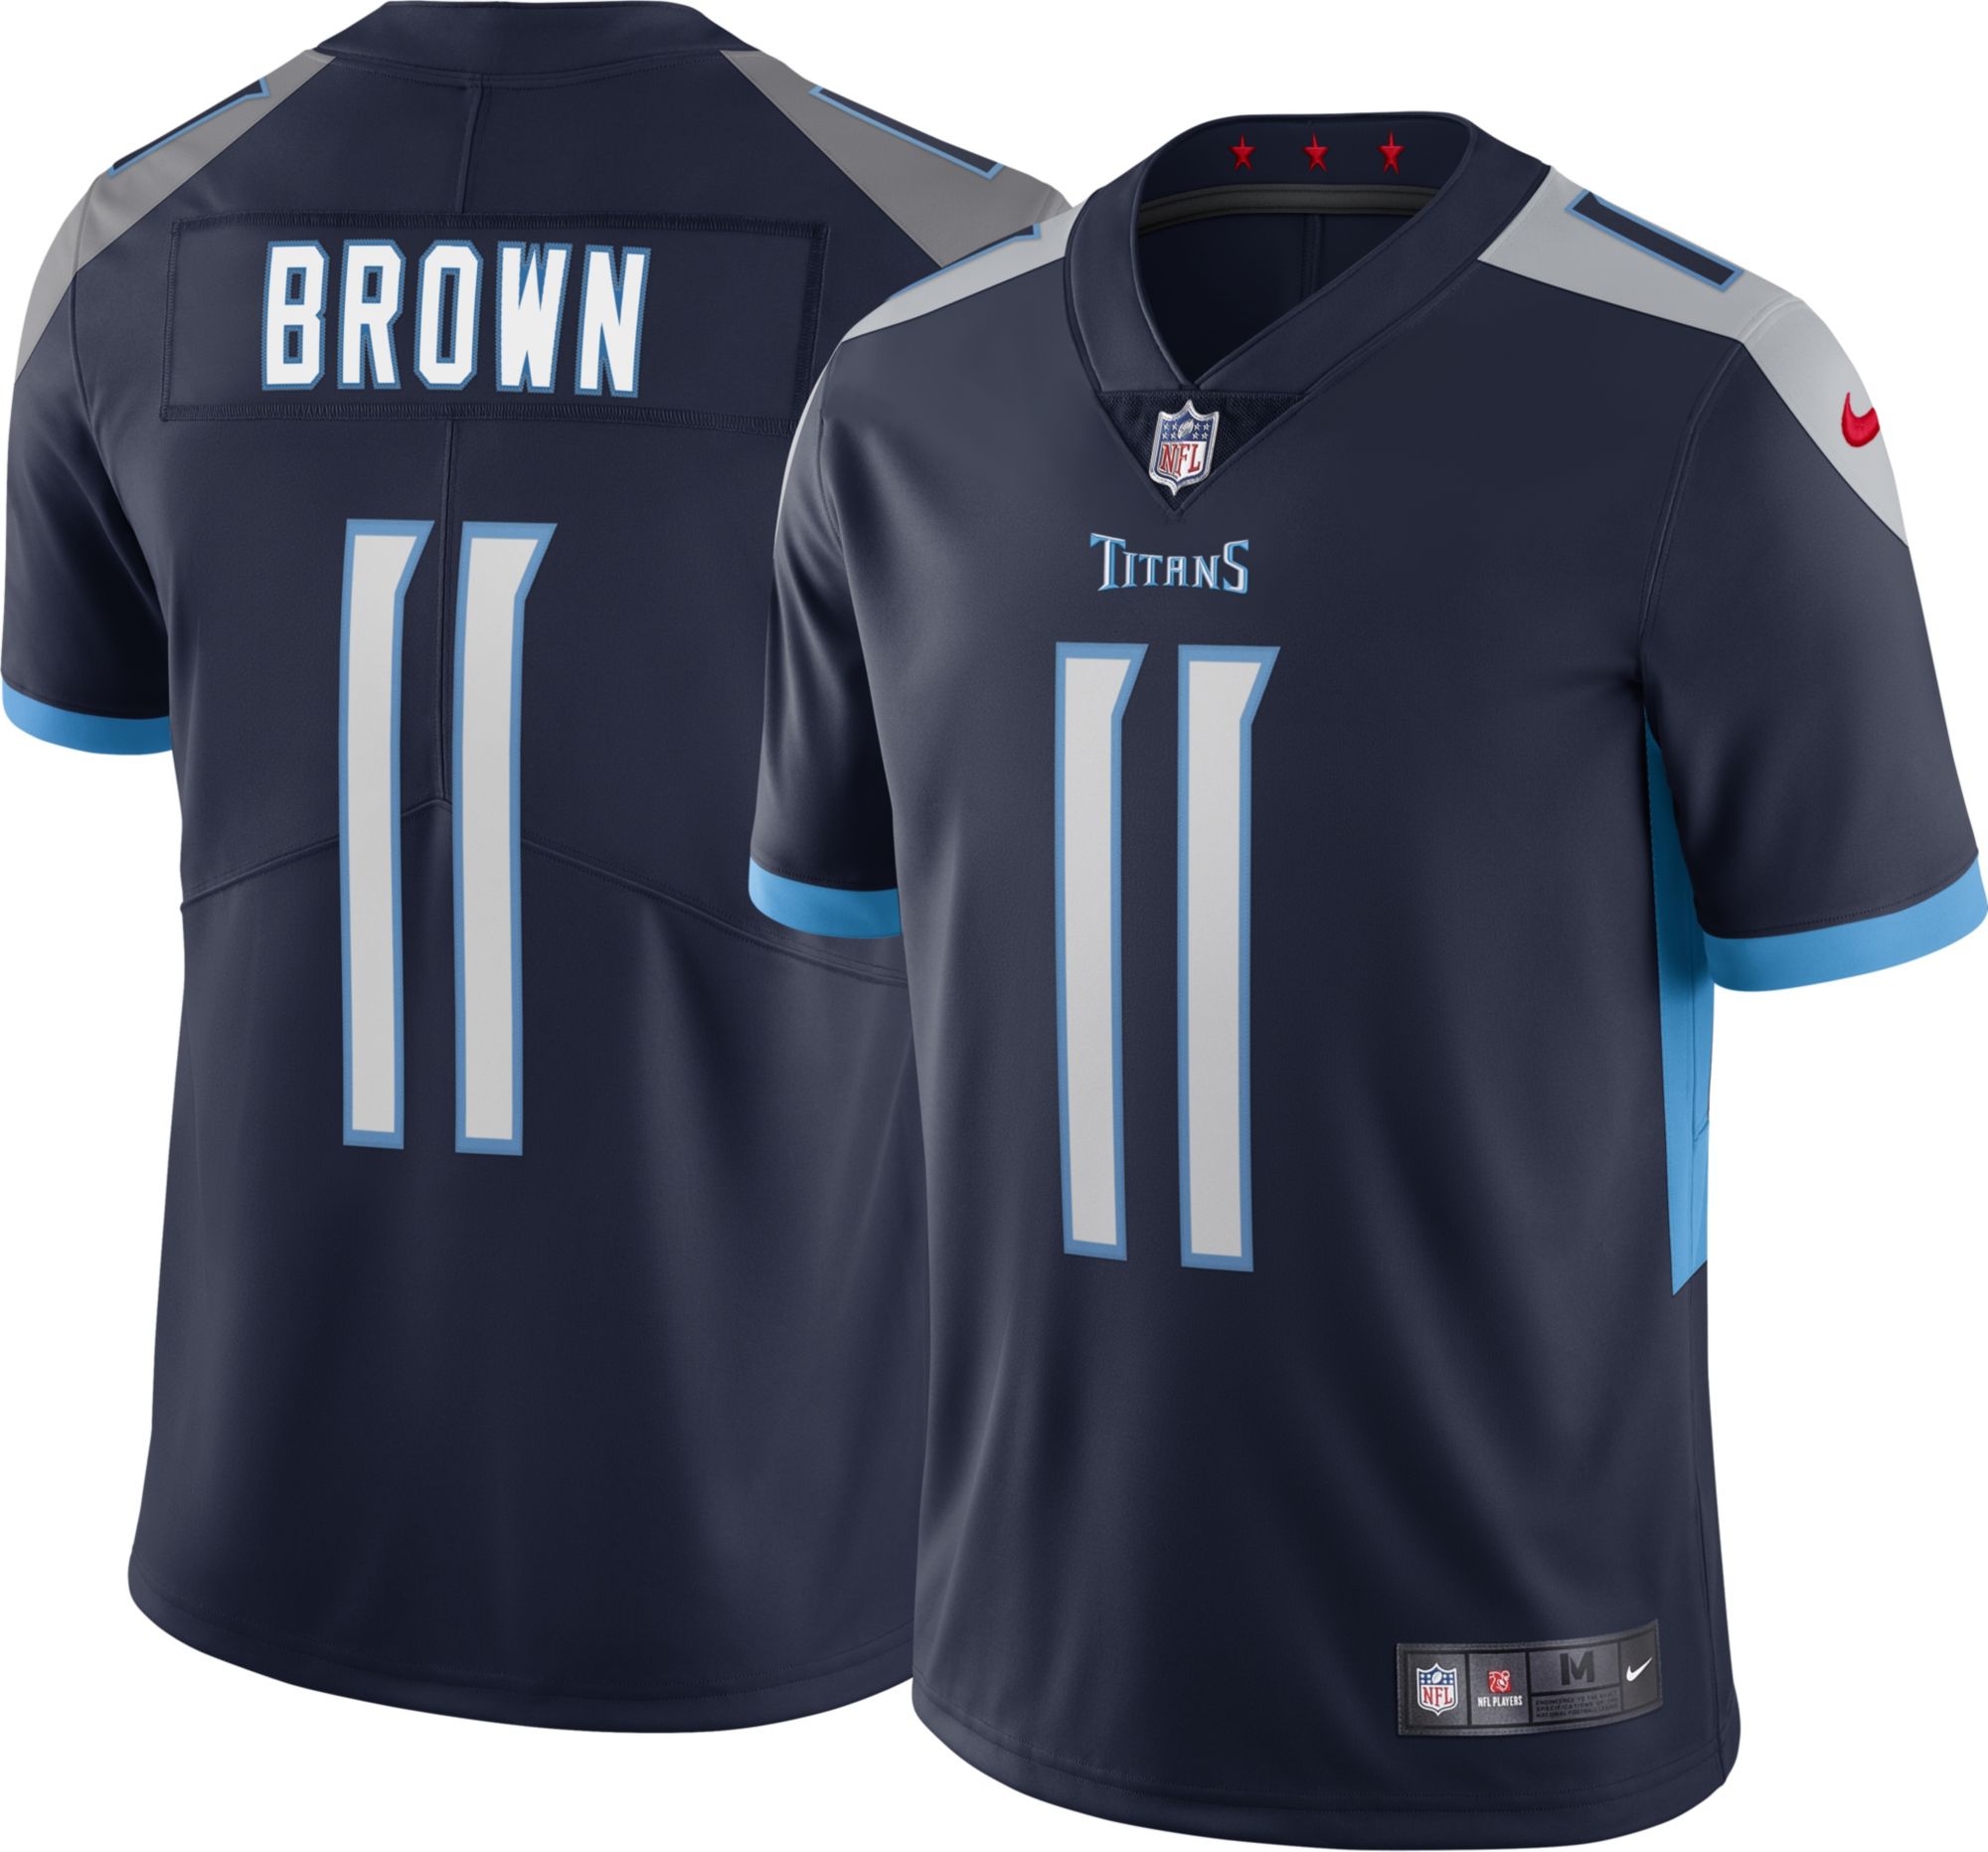 Nike / Men's Tennessee Titans A.J. Brown #11 Navy Limited Jersey